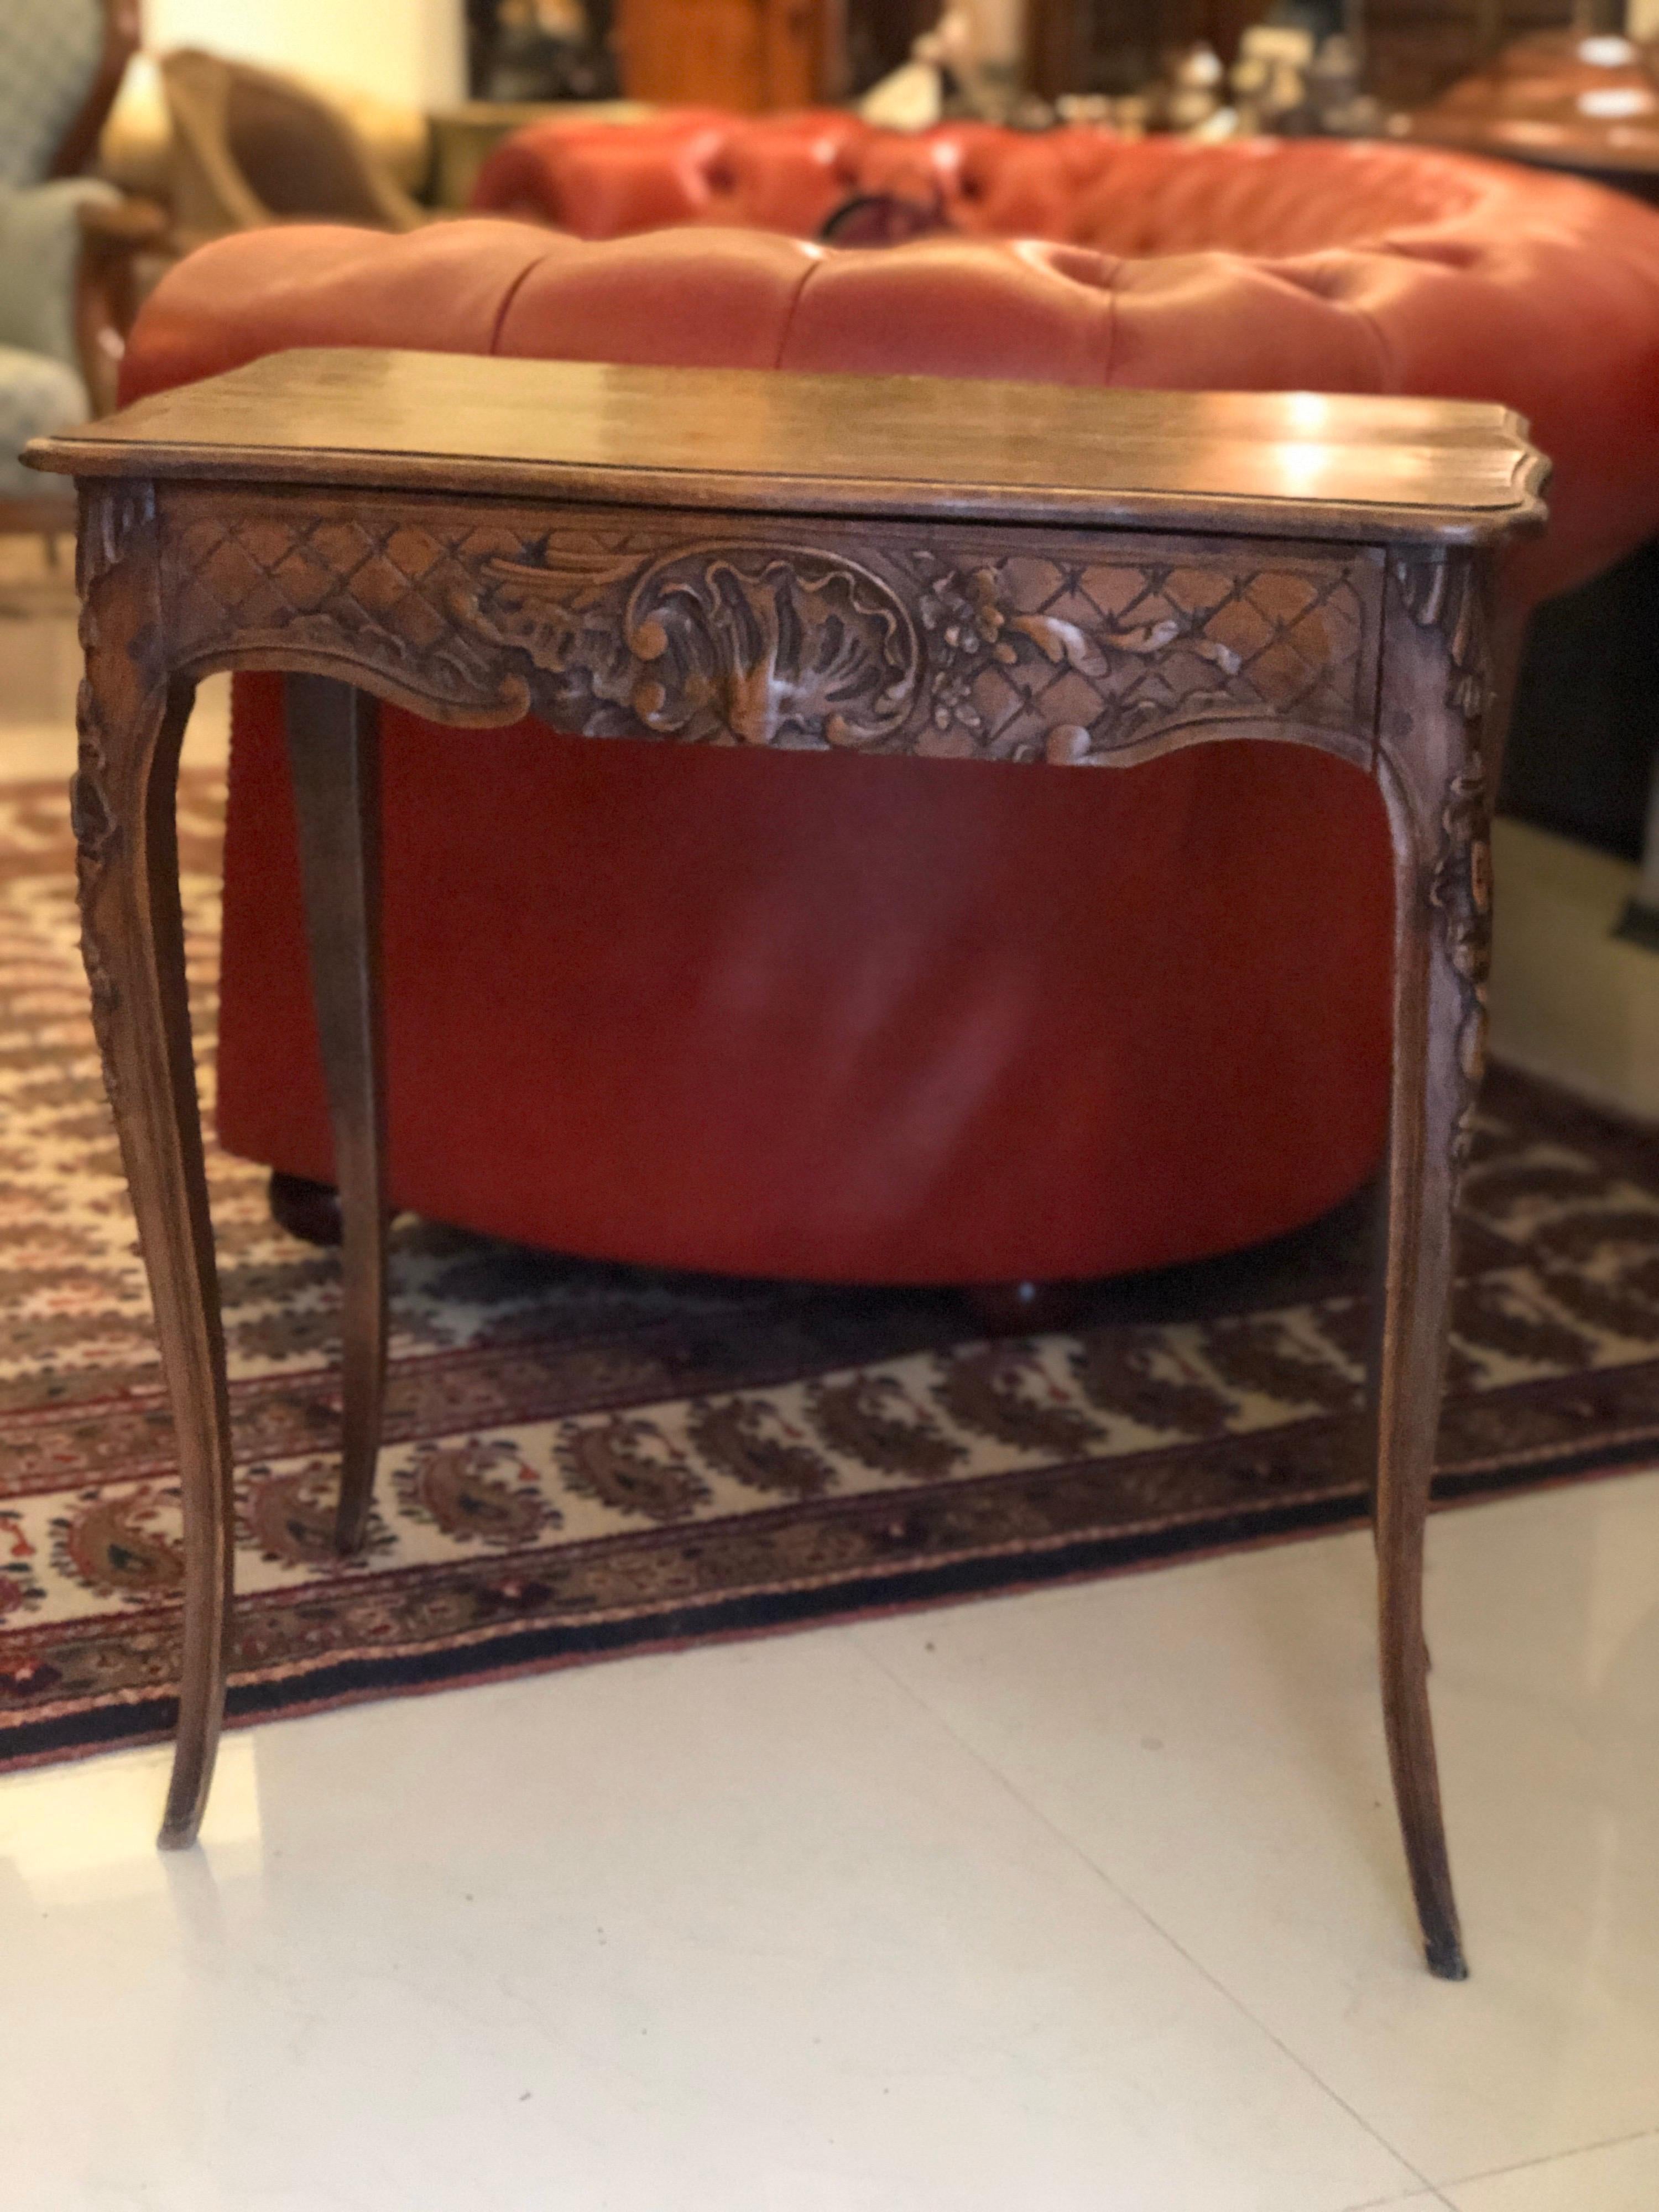 French hand carved walnut side table with elegant decoration and a large front drawer raised on carved legs.
Regency style,
circa 1860.